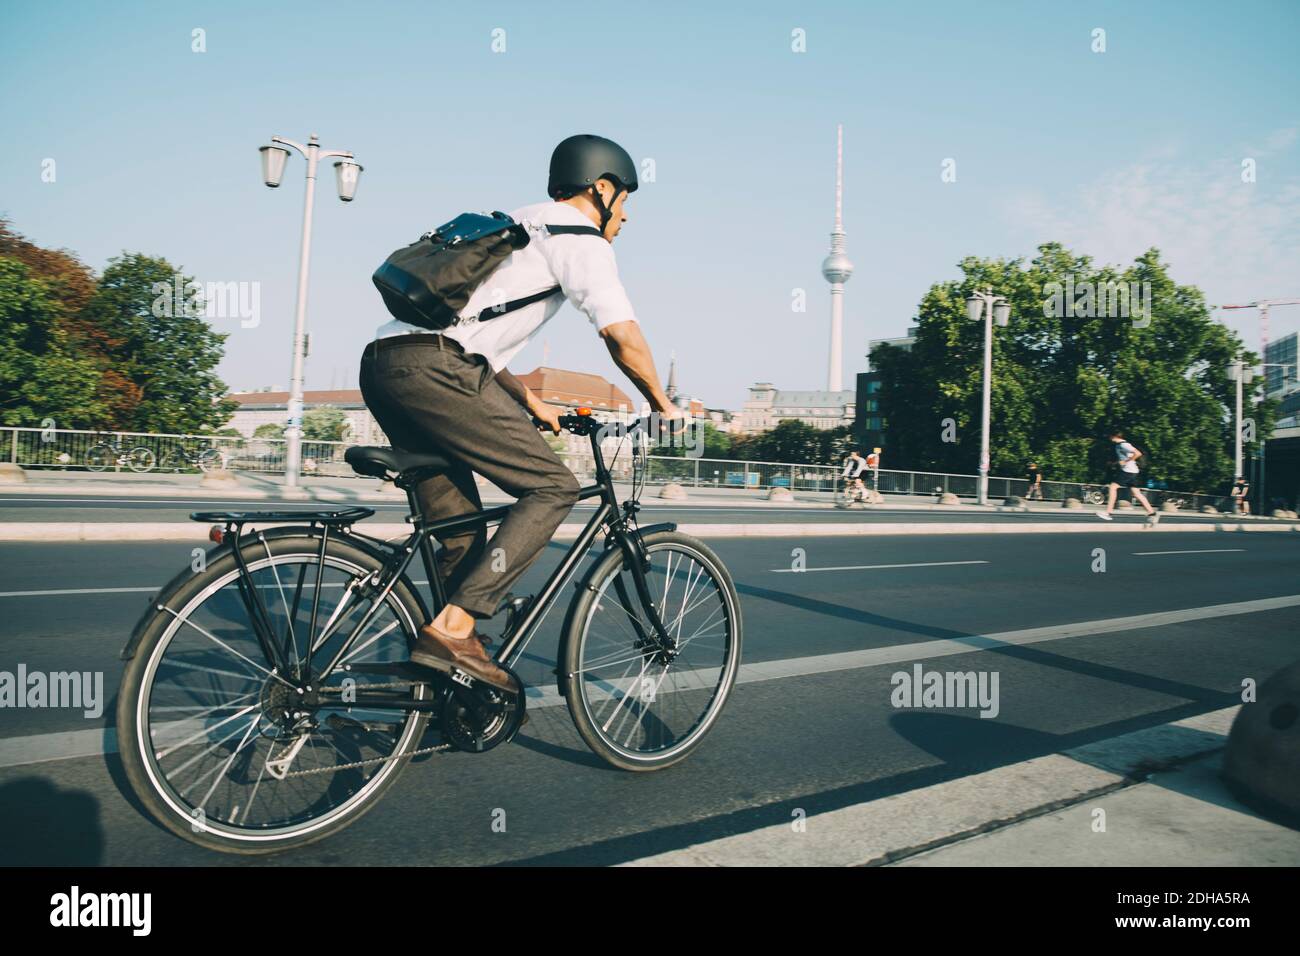 Businessman wearing helmet riding bicycle on road in city against sky Stock Photo